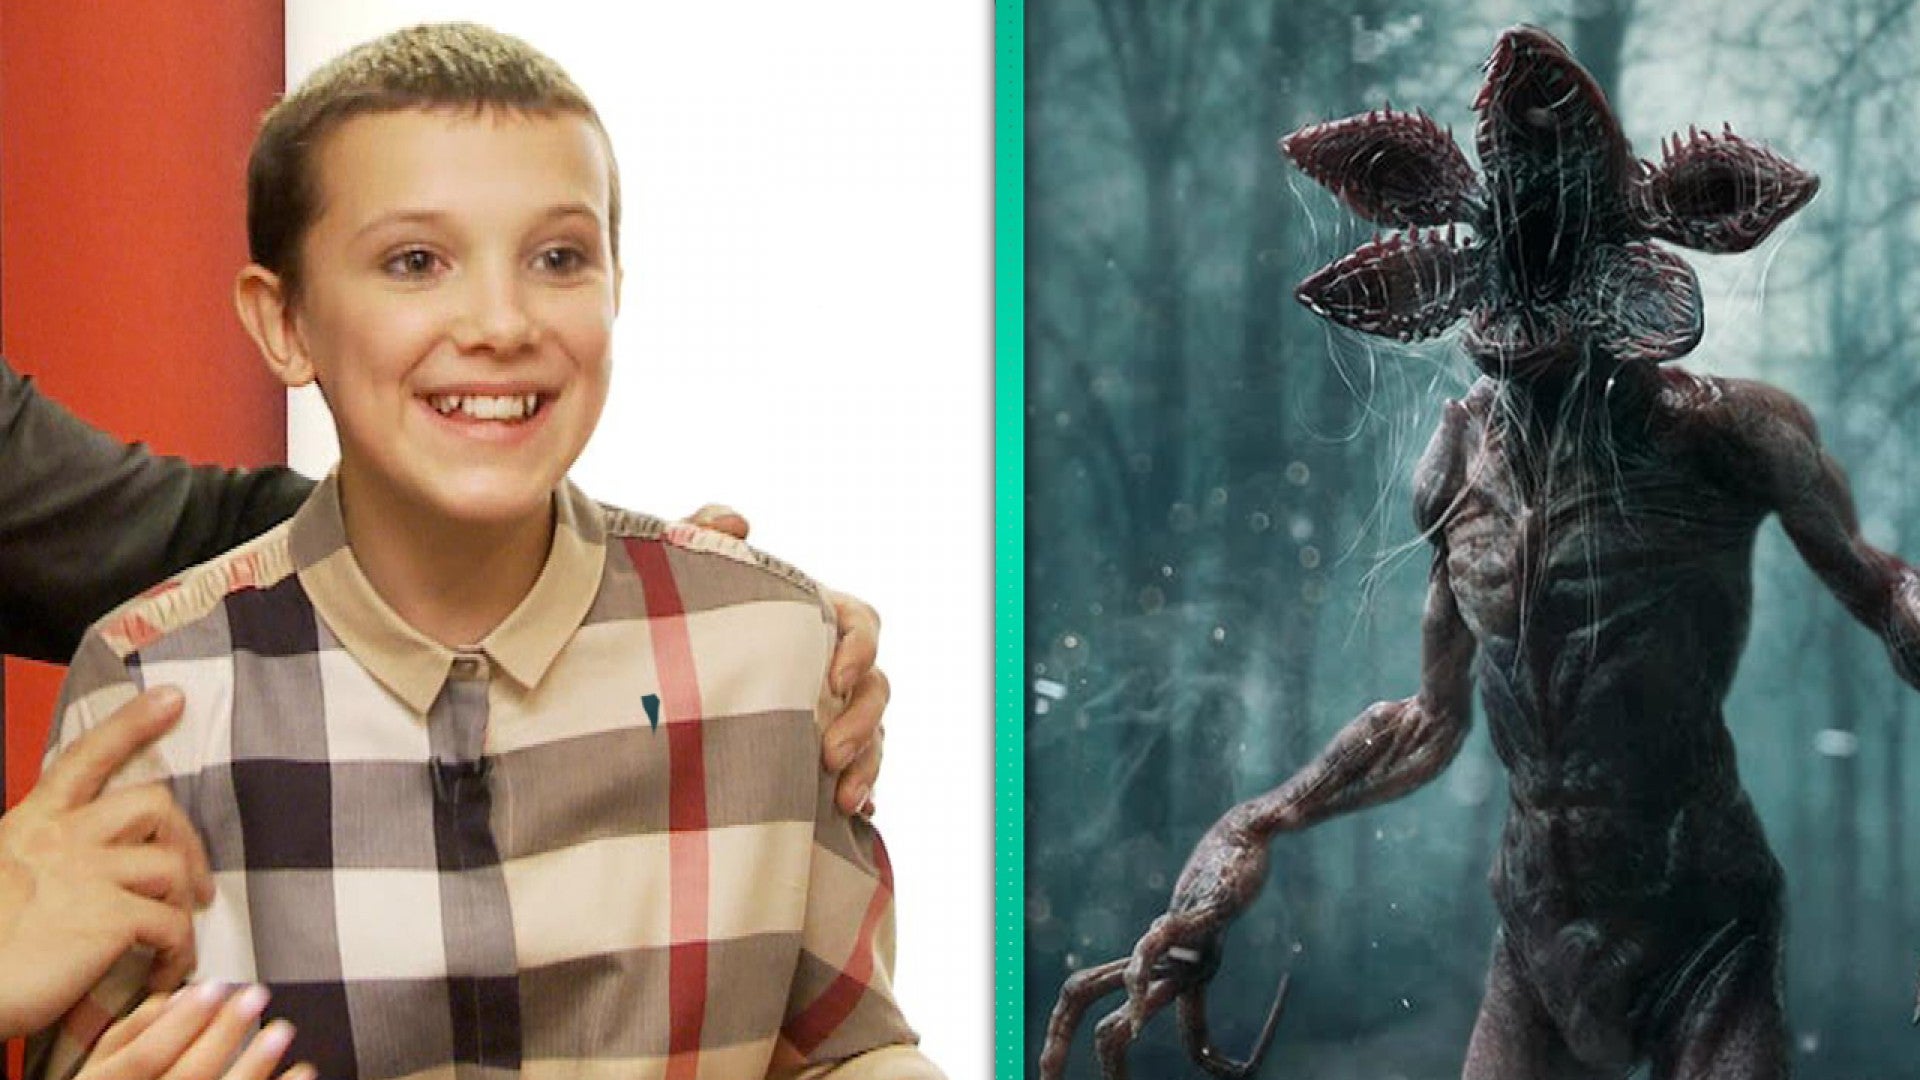 Watch Stranger Things Star Millie Bobby Brown Transform from Cute Chil